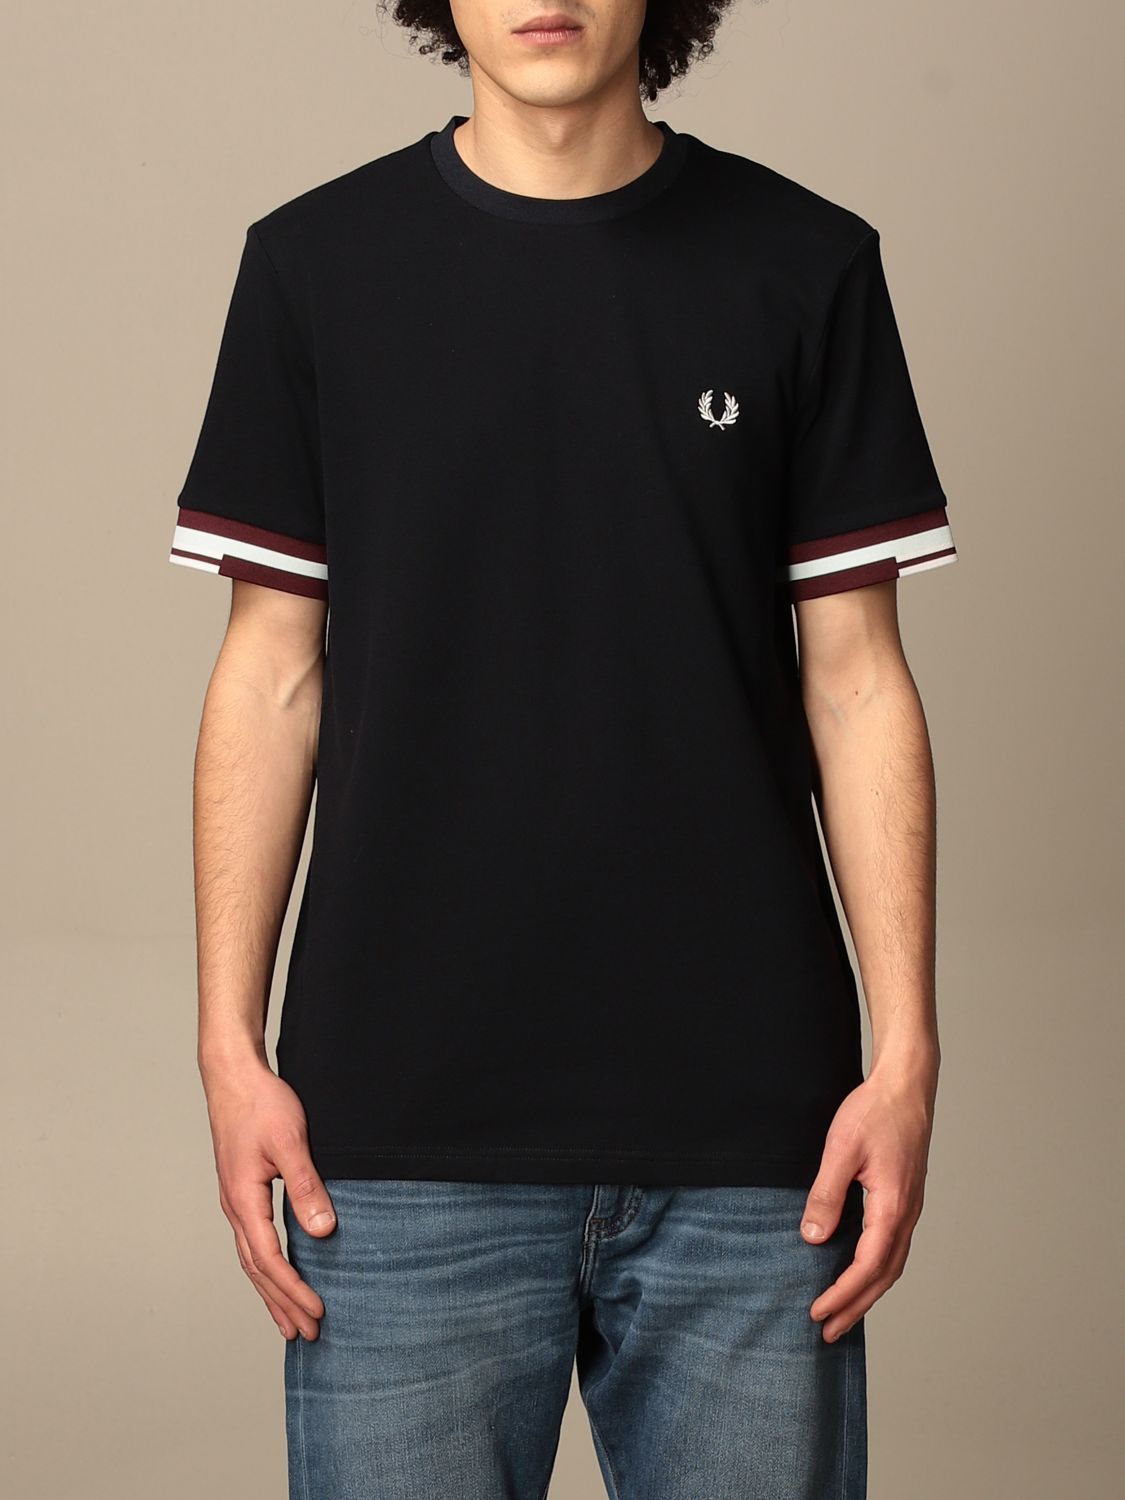 FRED PERRY: cotton t-shirt - Blue | Fred Perry t-shirt M1601 online on ...